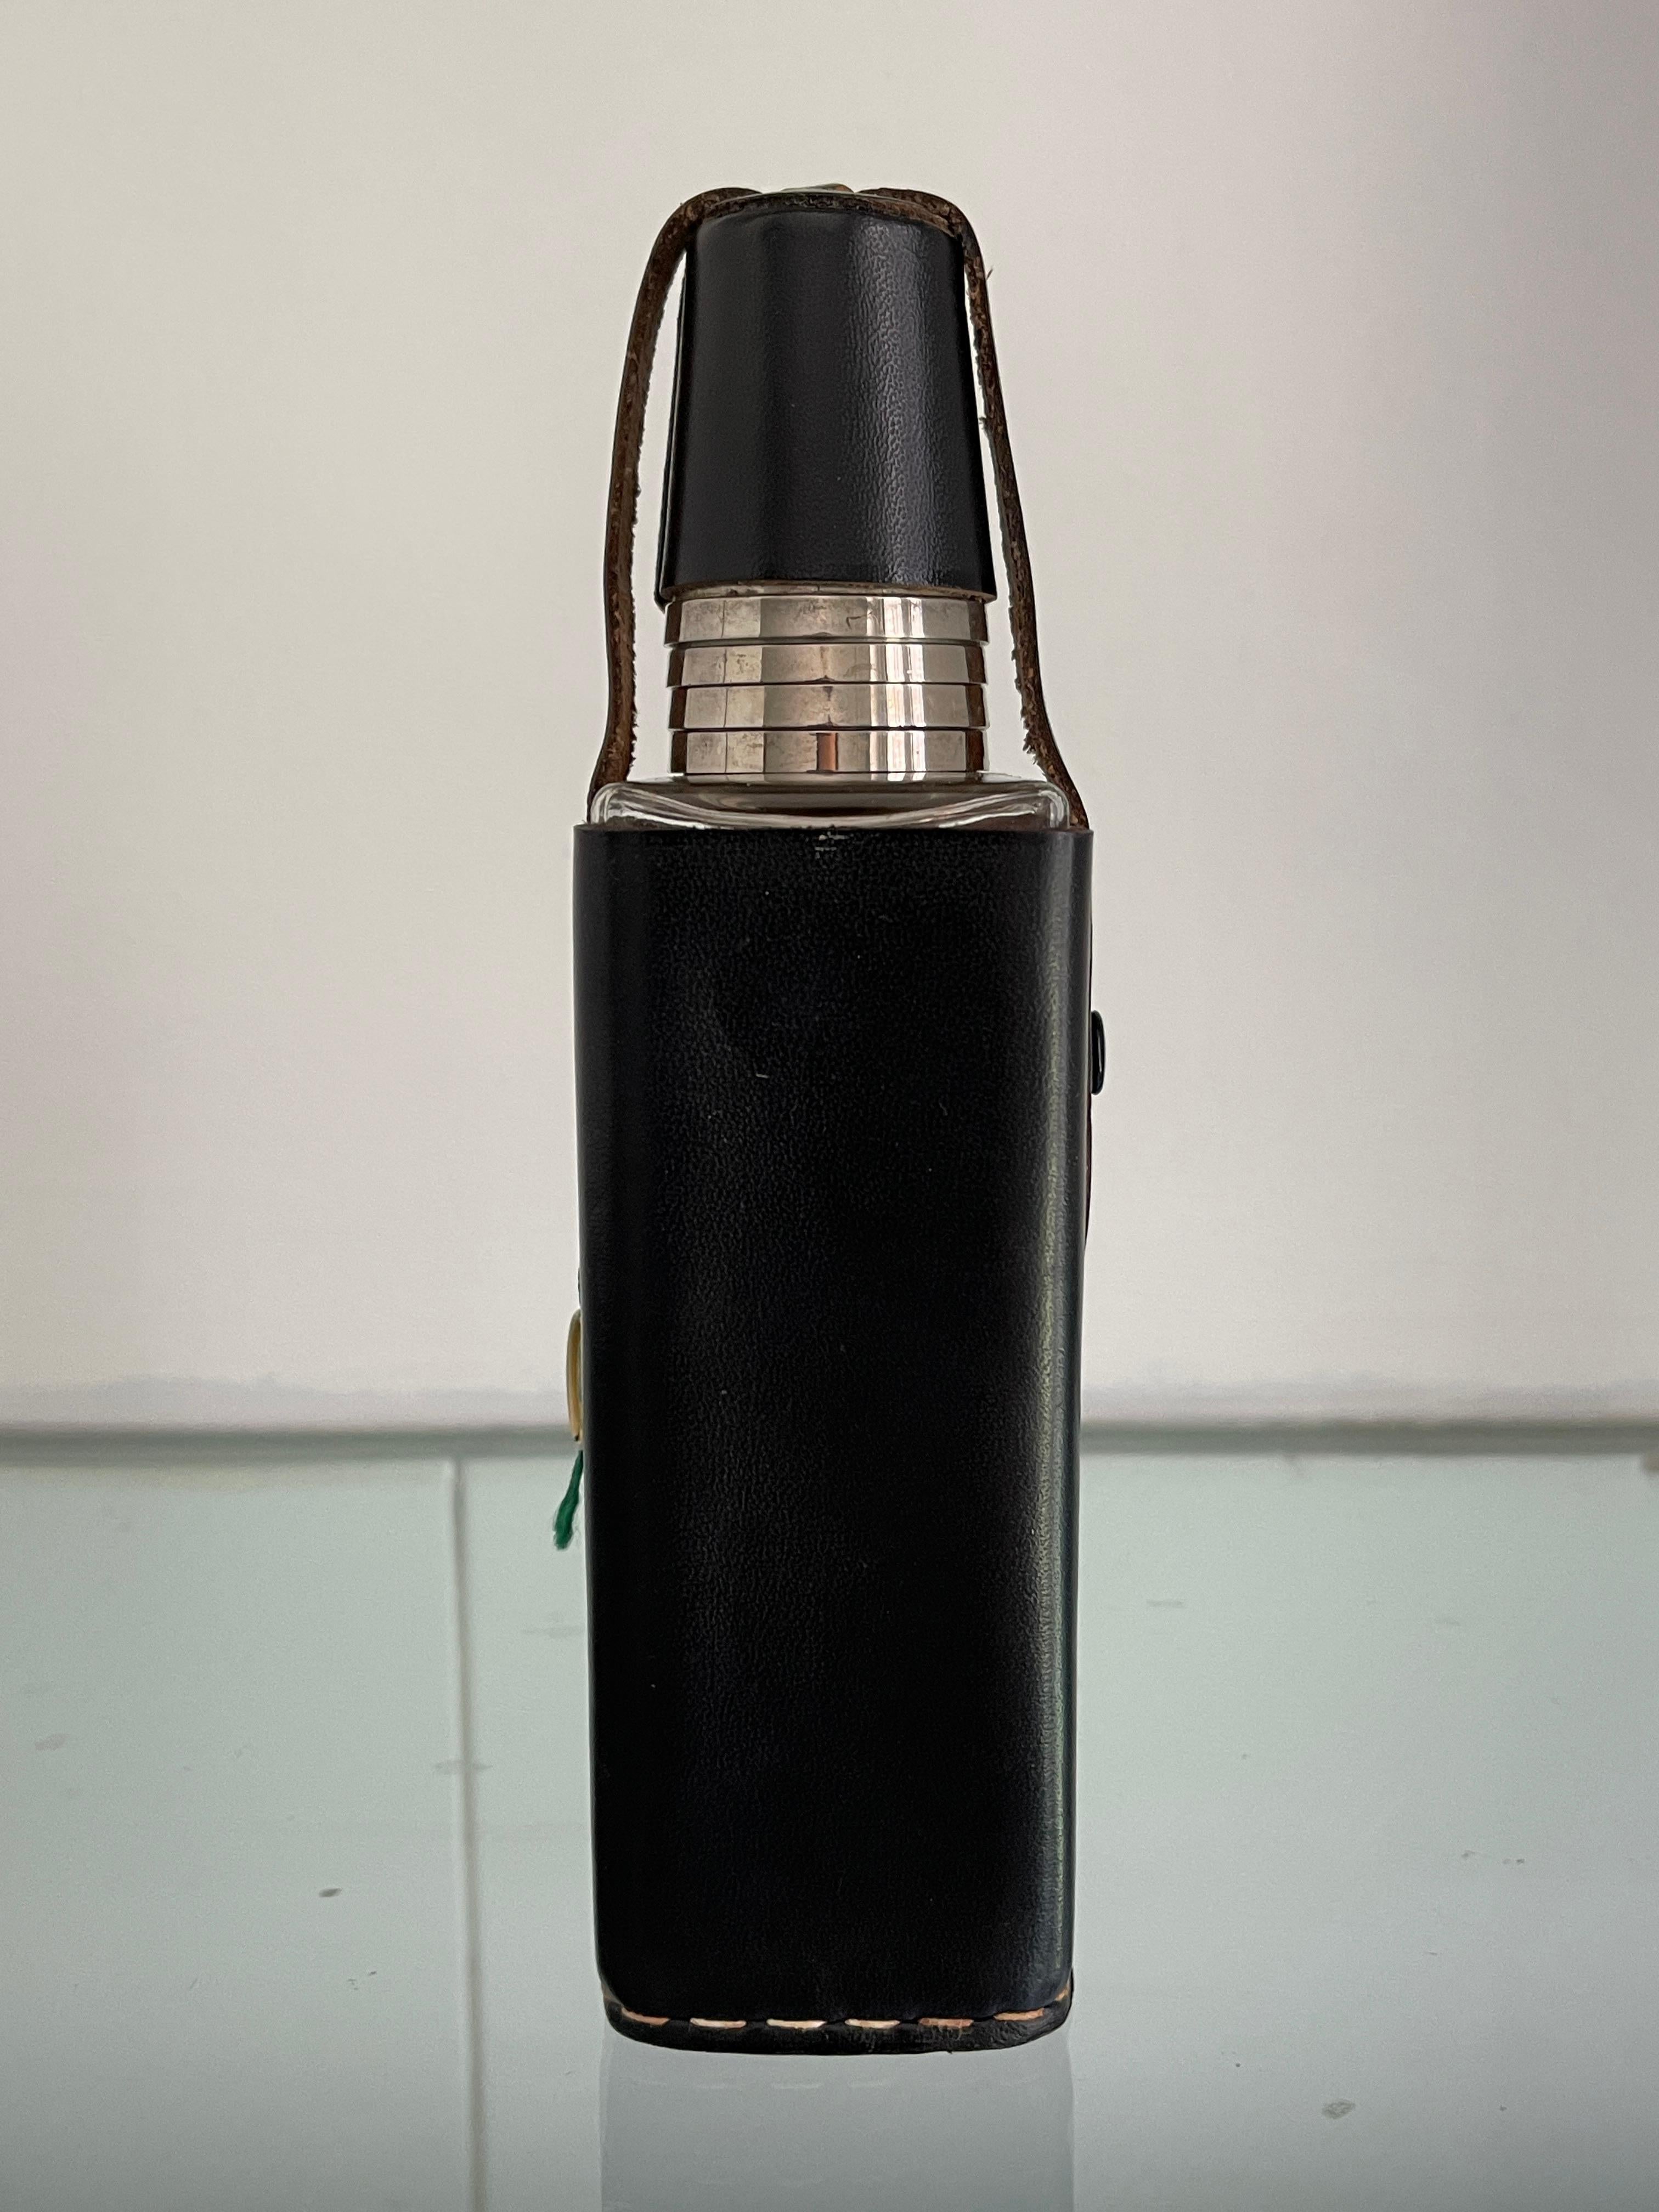 German mid-century fine hand stitched black leather covered glass flask bottle with 4 shot glasses.Top snaps off to reveal shot glasses over bottle top. Label attached, UTH Offenbacher Lederwaren Qualitatstreu.